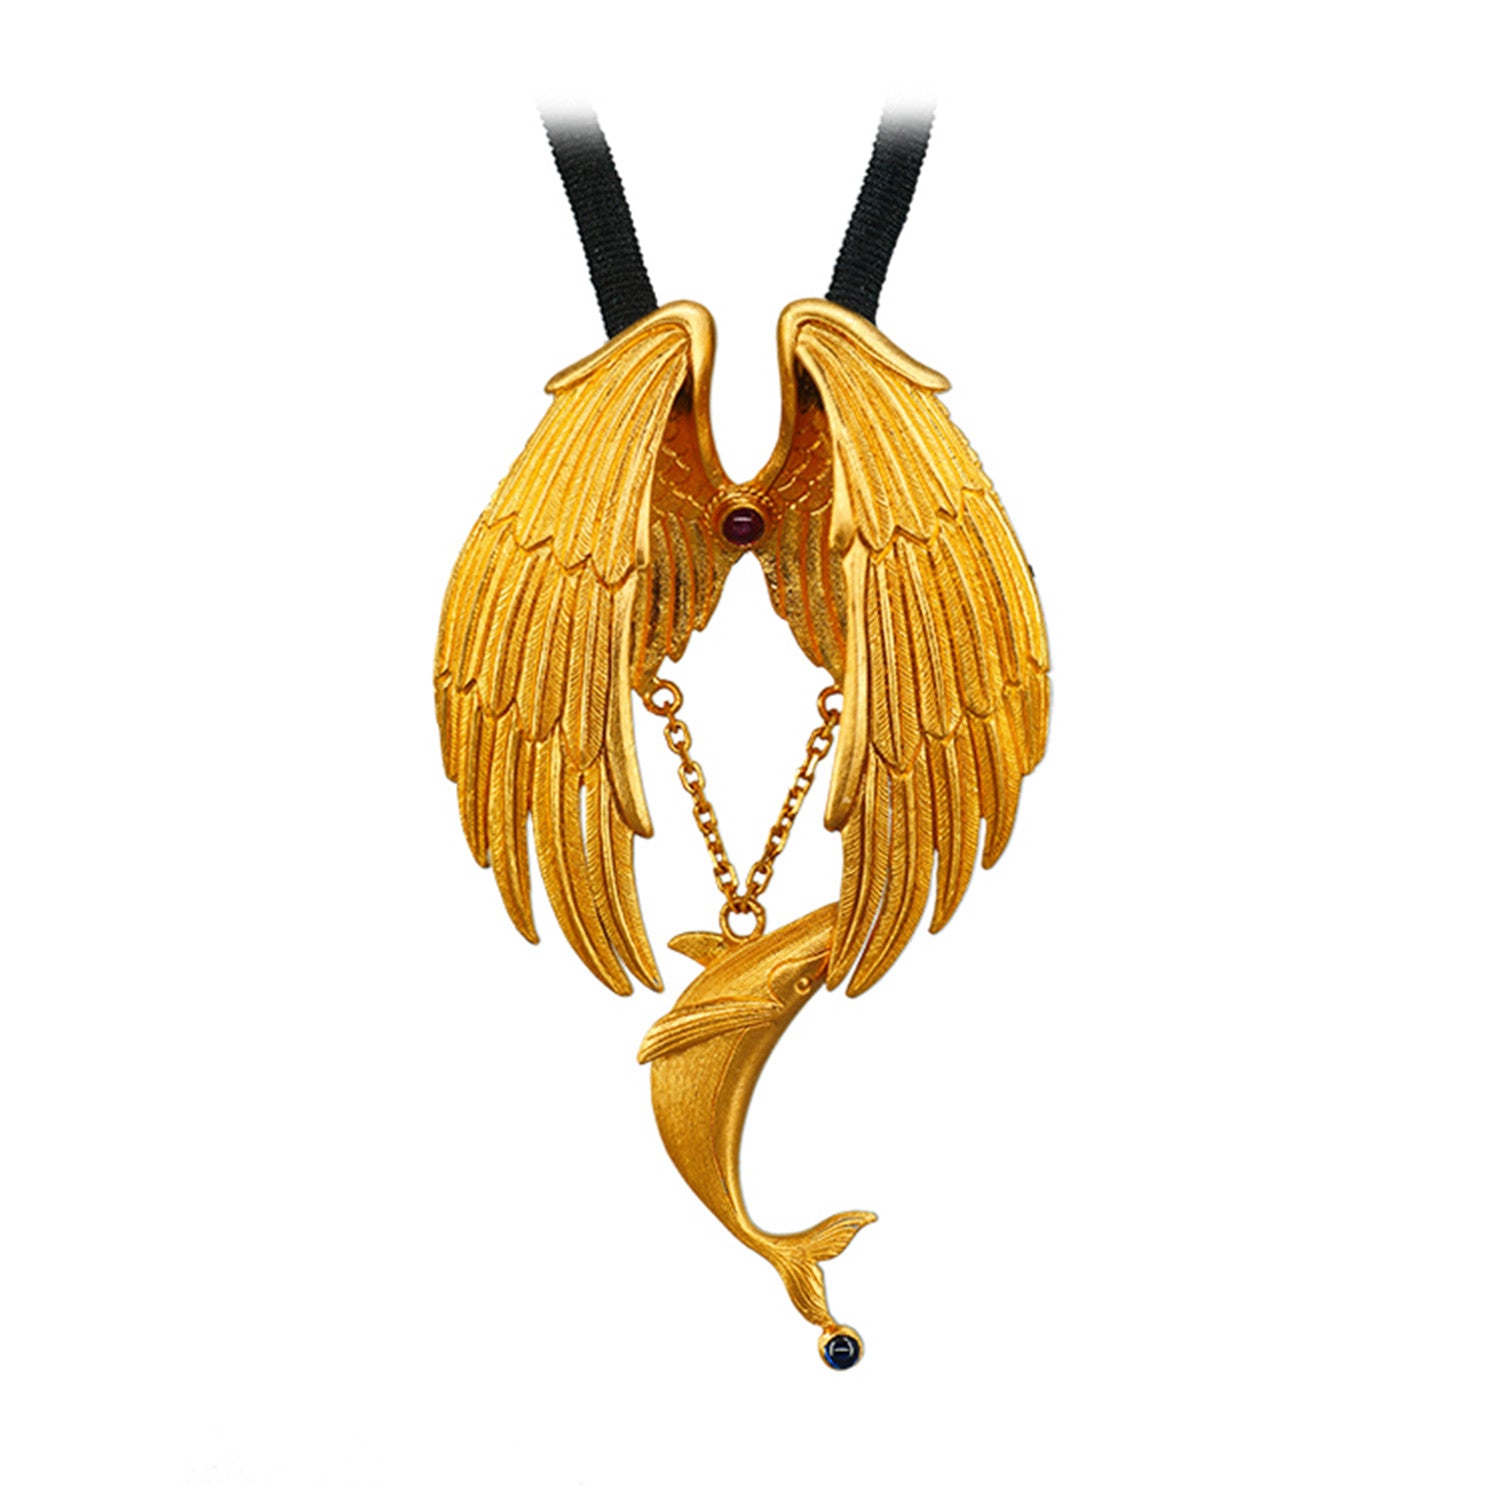 EVECOCO Full Gold Pendants,Fish and Wing Pattern,Hand Forging,Fine Carving 35g